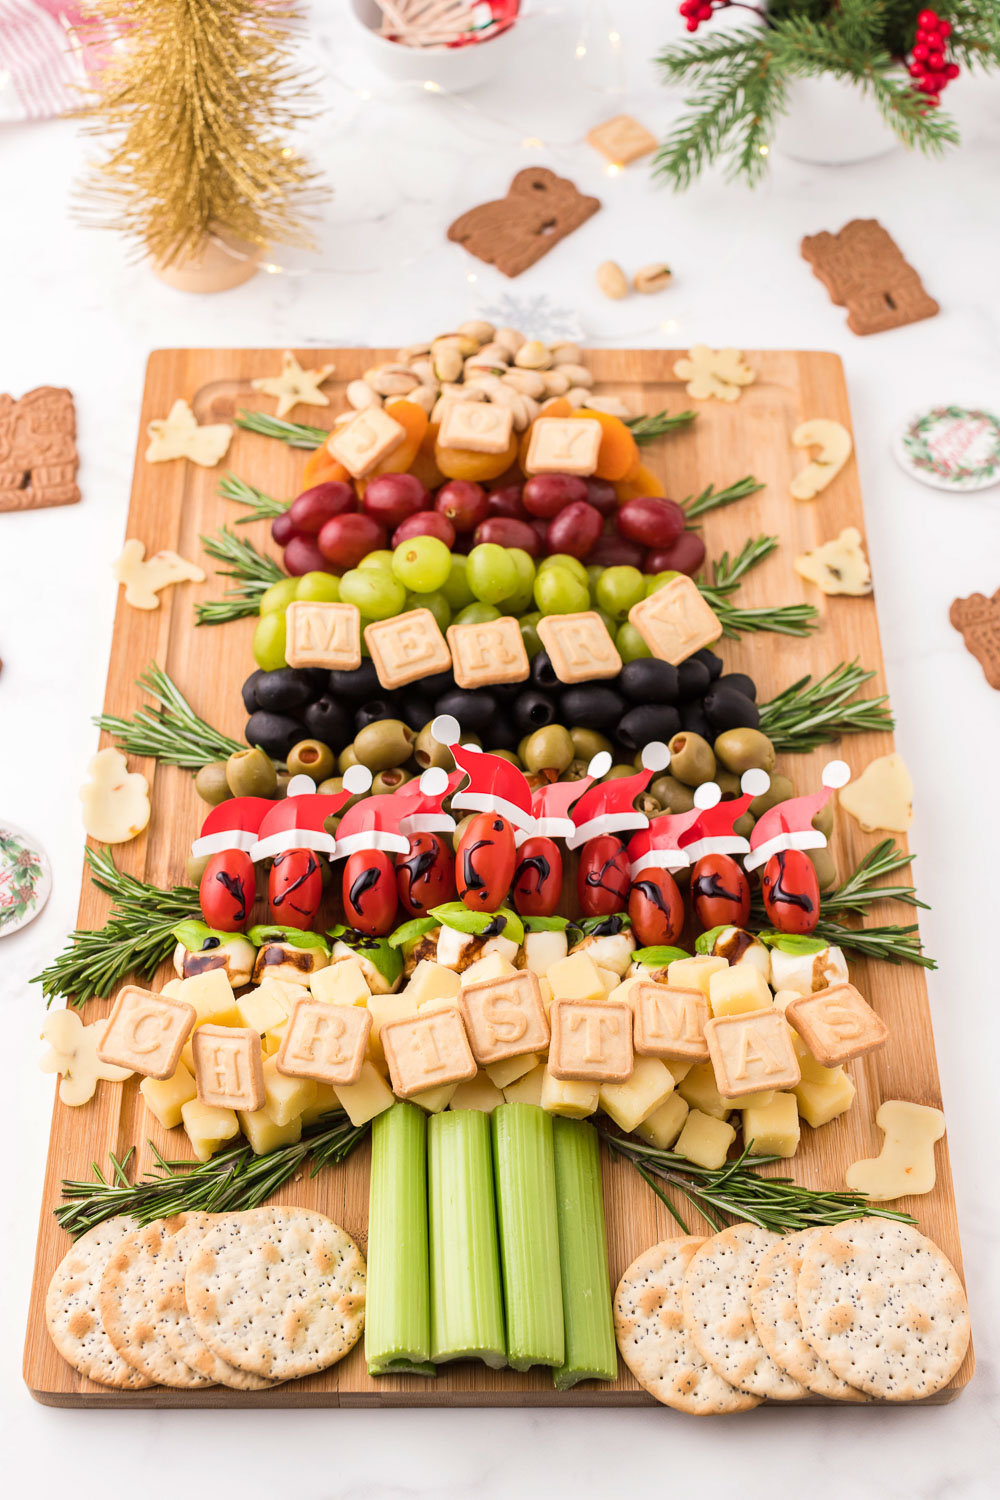 A wooden board with snacks, fruits and food in the shape of a Christmas tree.